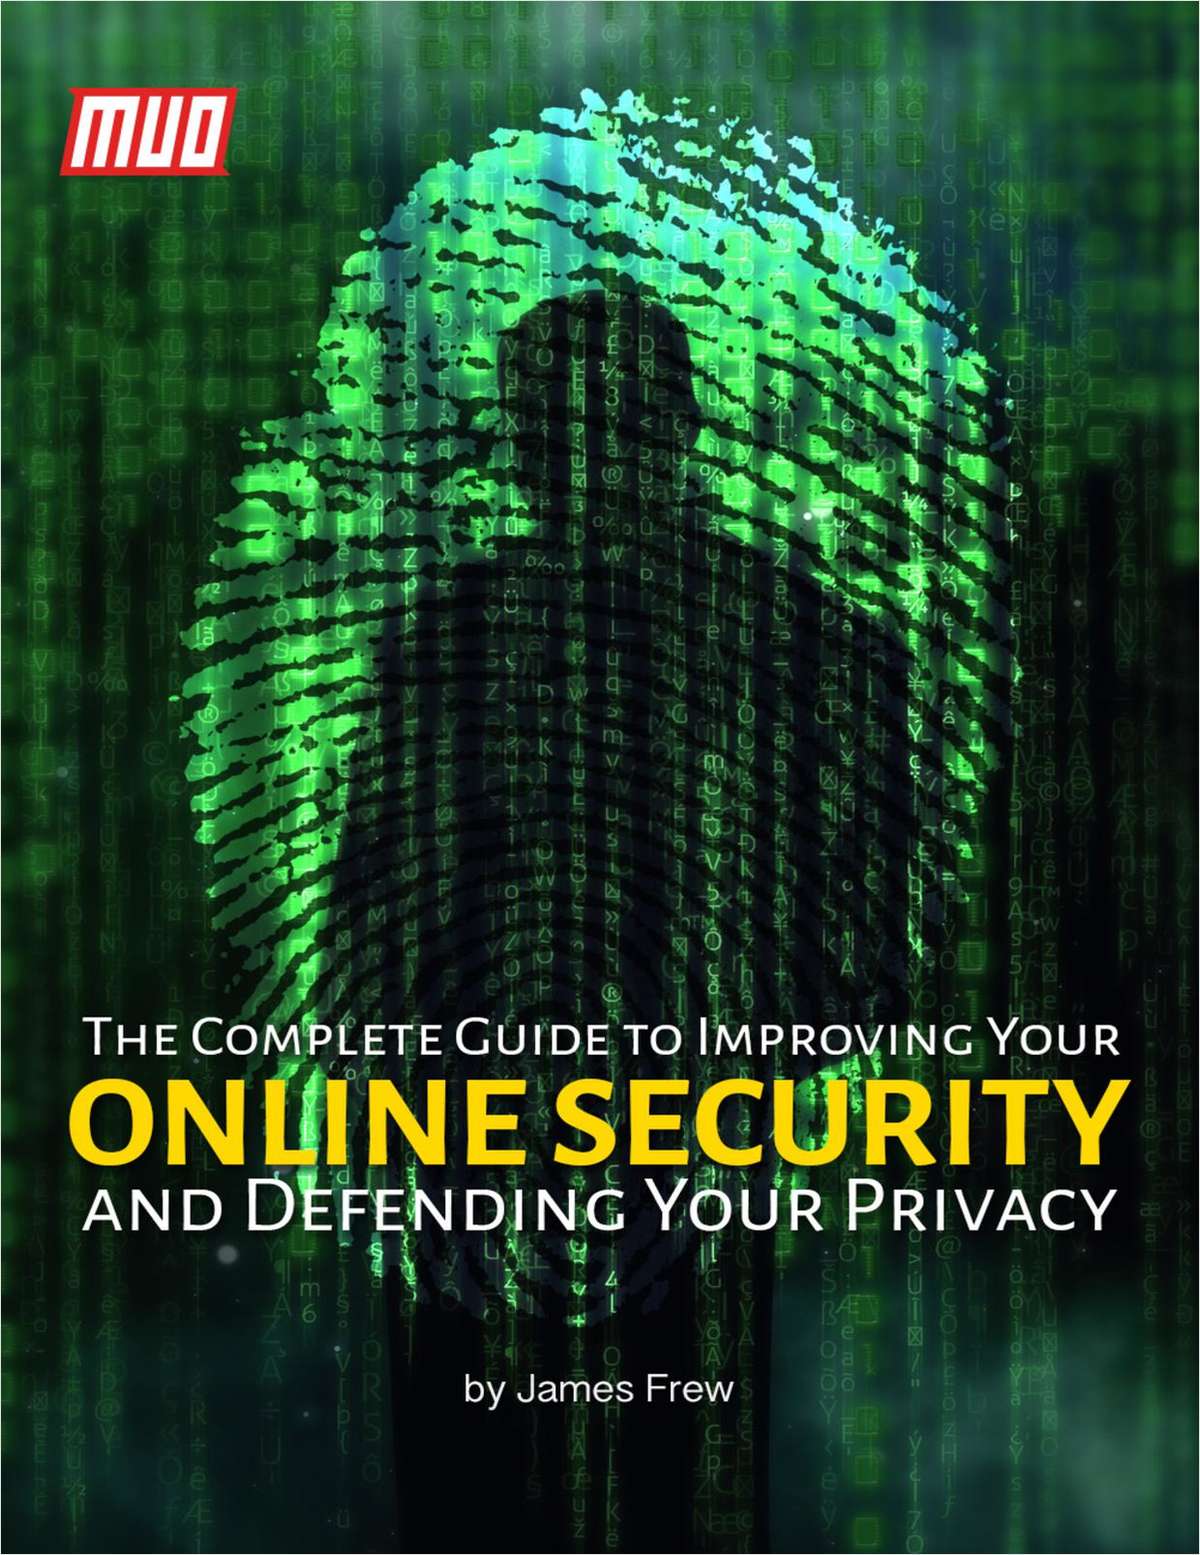 The Complete Guide to Improving Your Online Security and Defending Your Privacy